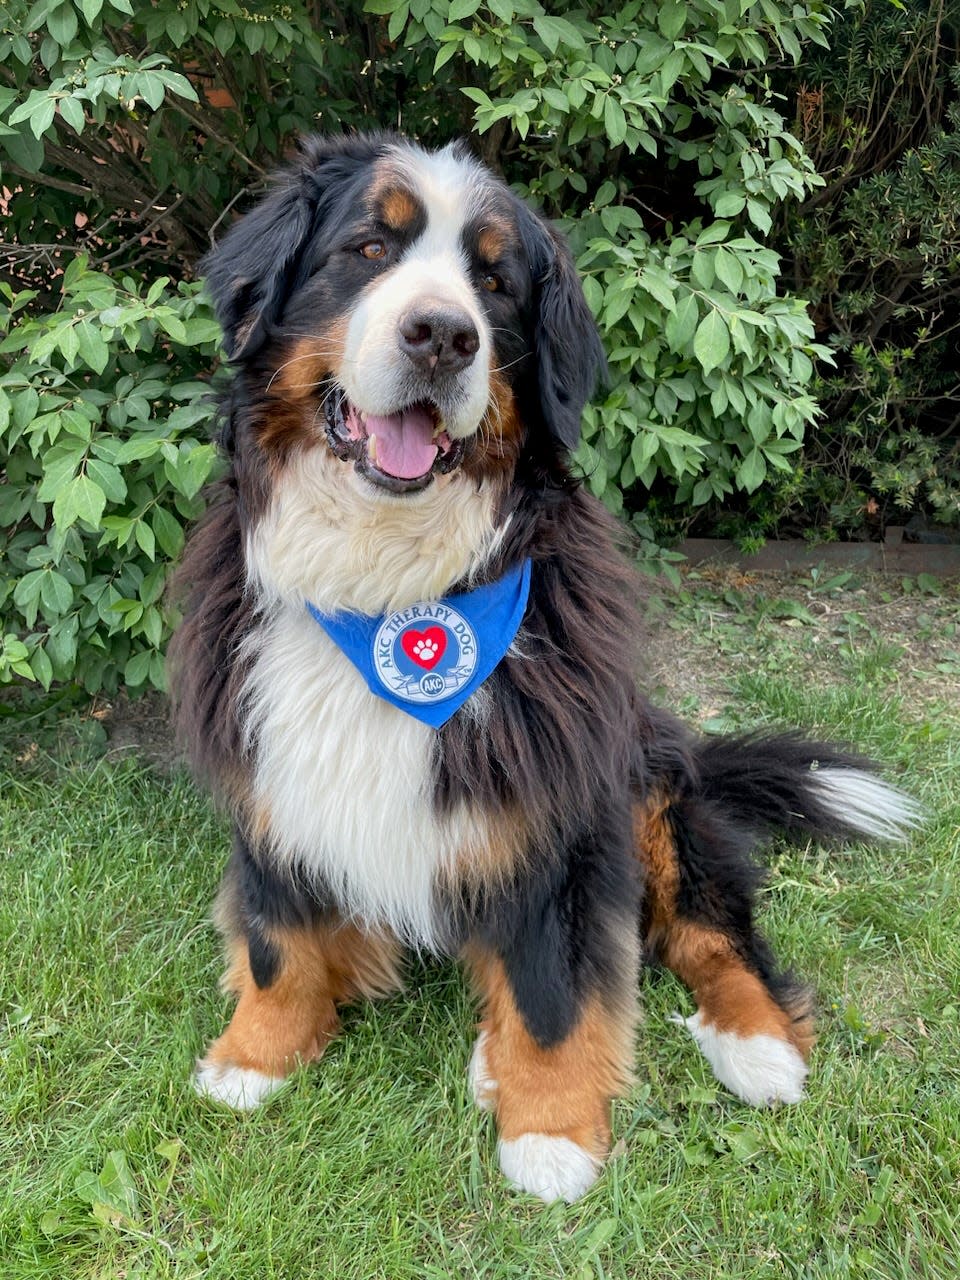 Link, a 7-year-old Bernese Mountain dog and Project Second Chance Monroe spokesdog, strikes a pose prior to his first interview.